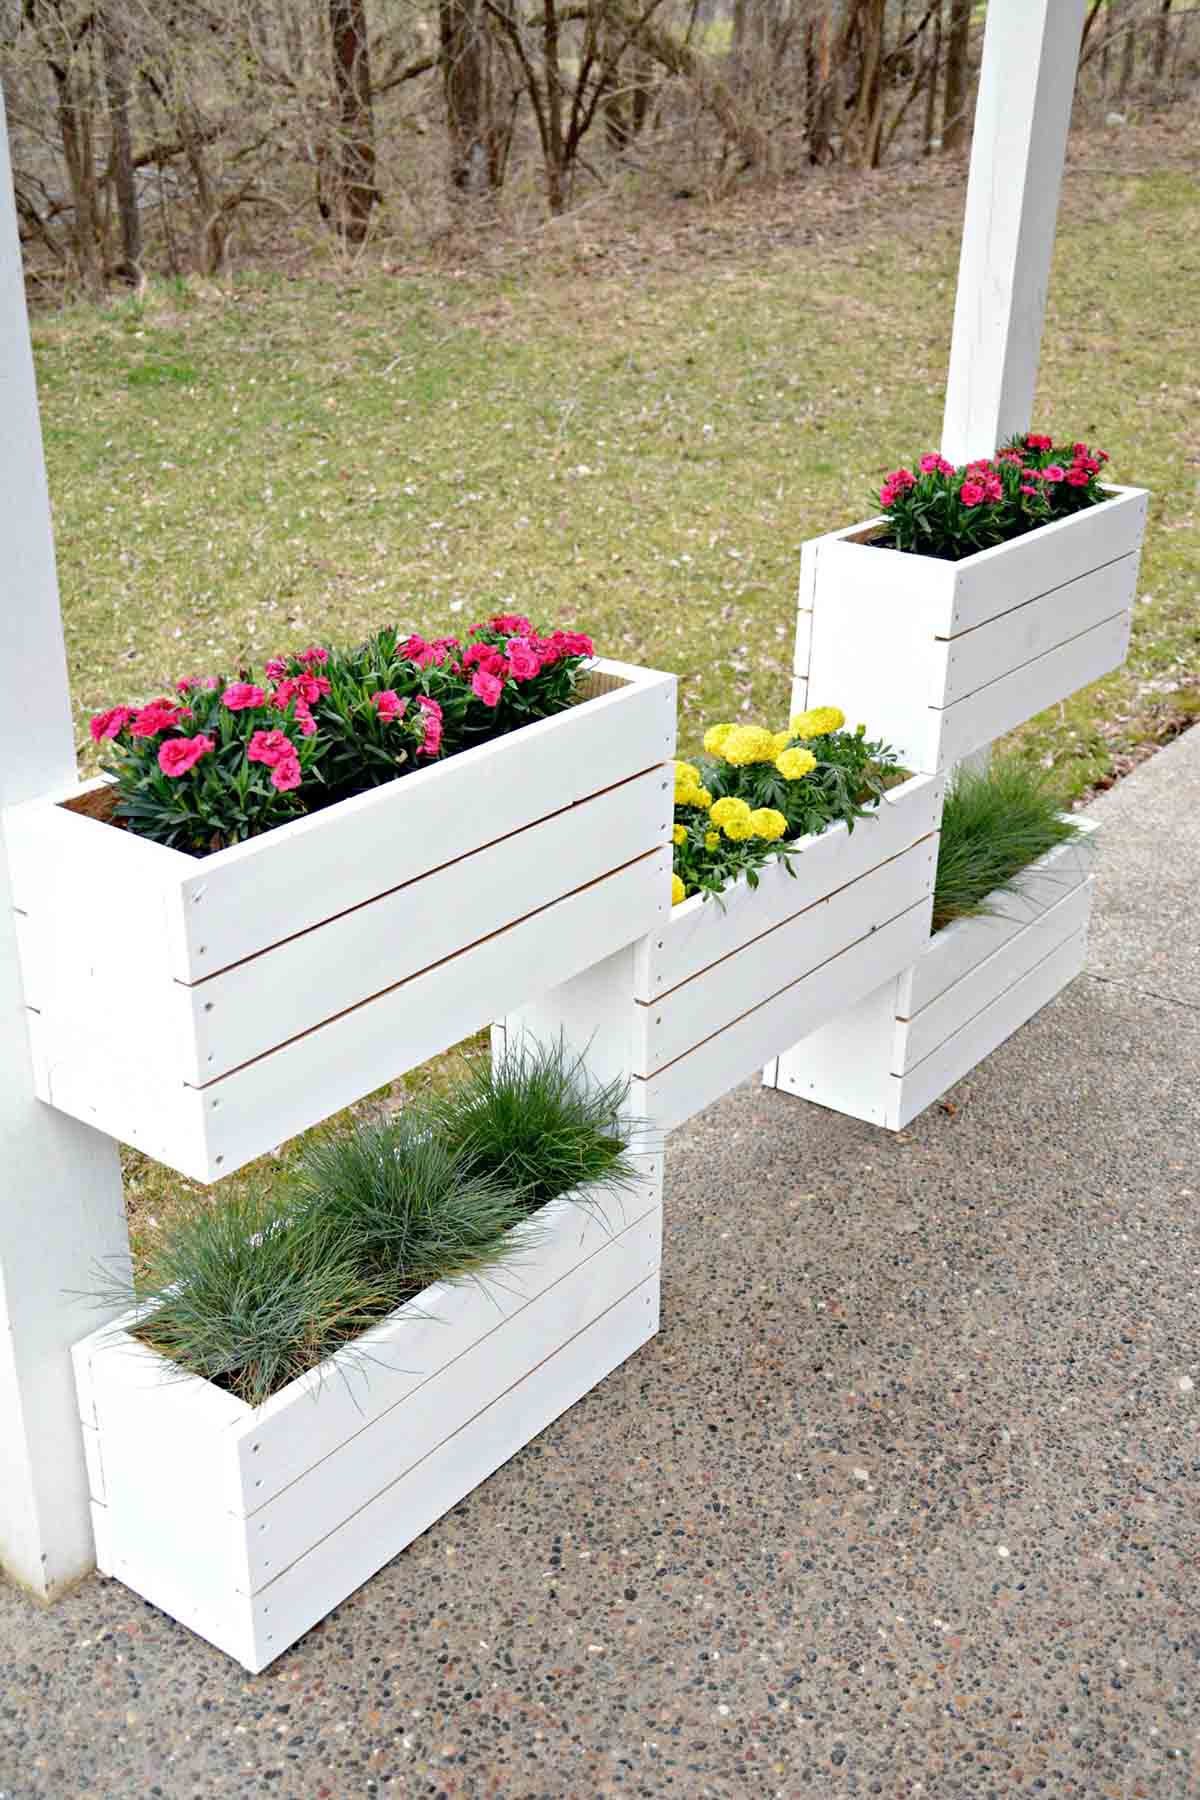 32 Best DIY Pallet and Wood Planter Box Ideas and Designs ...